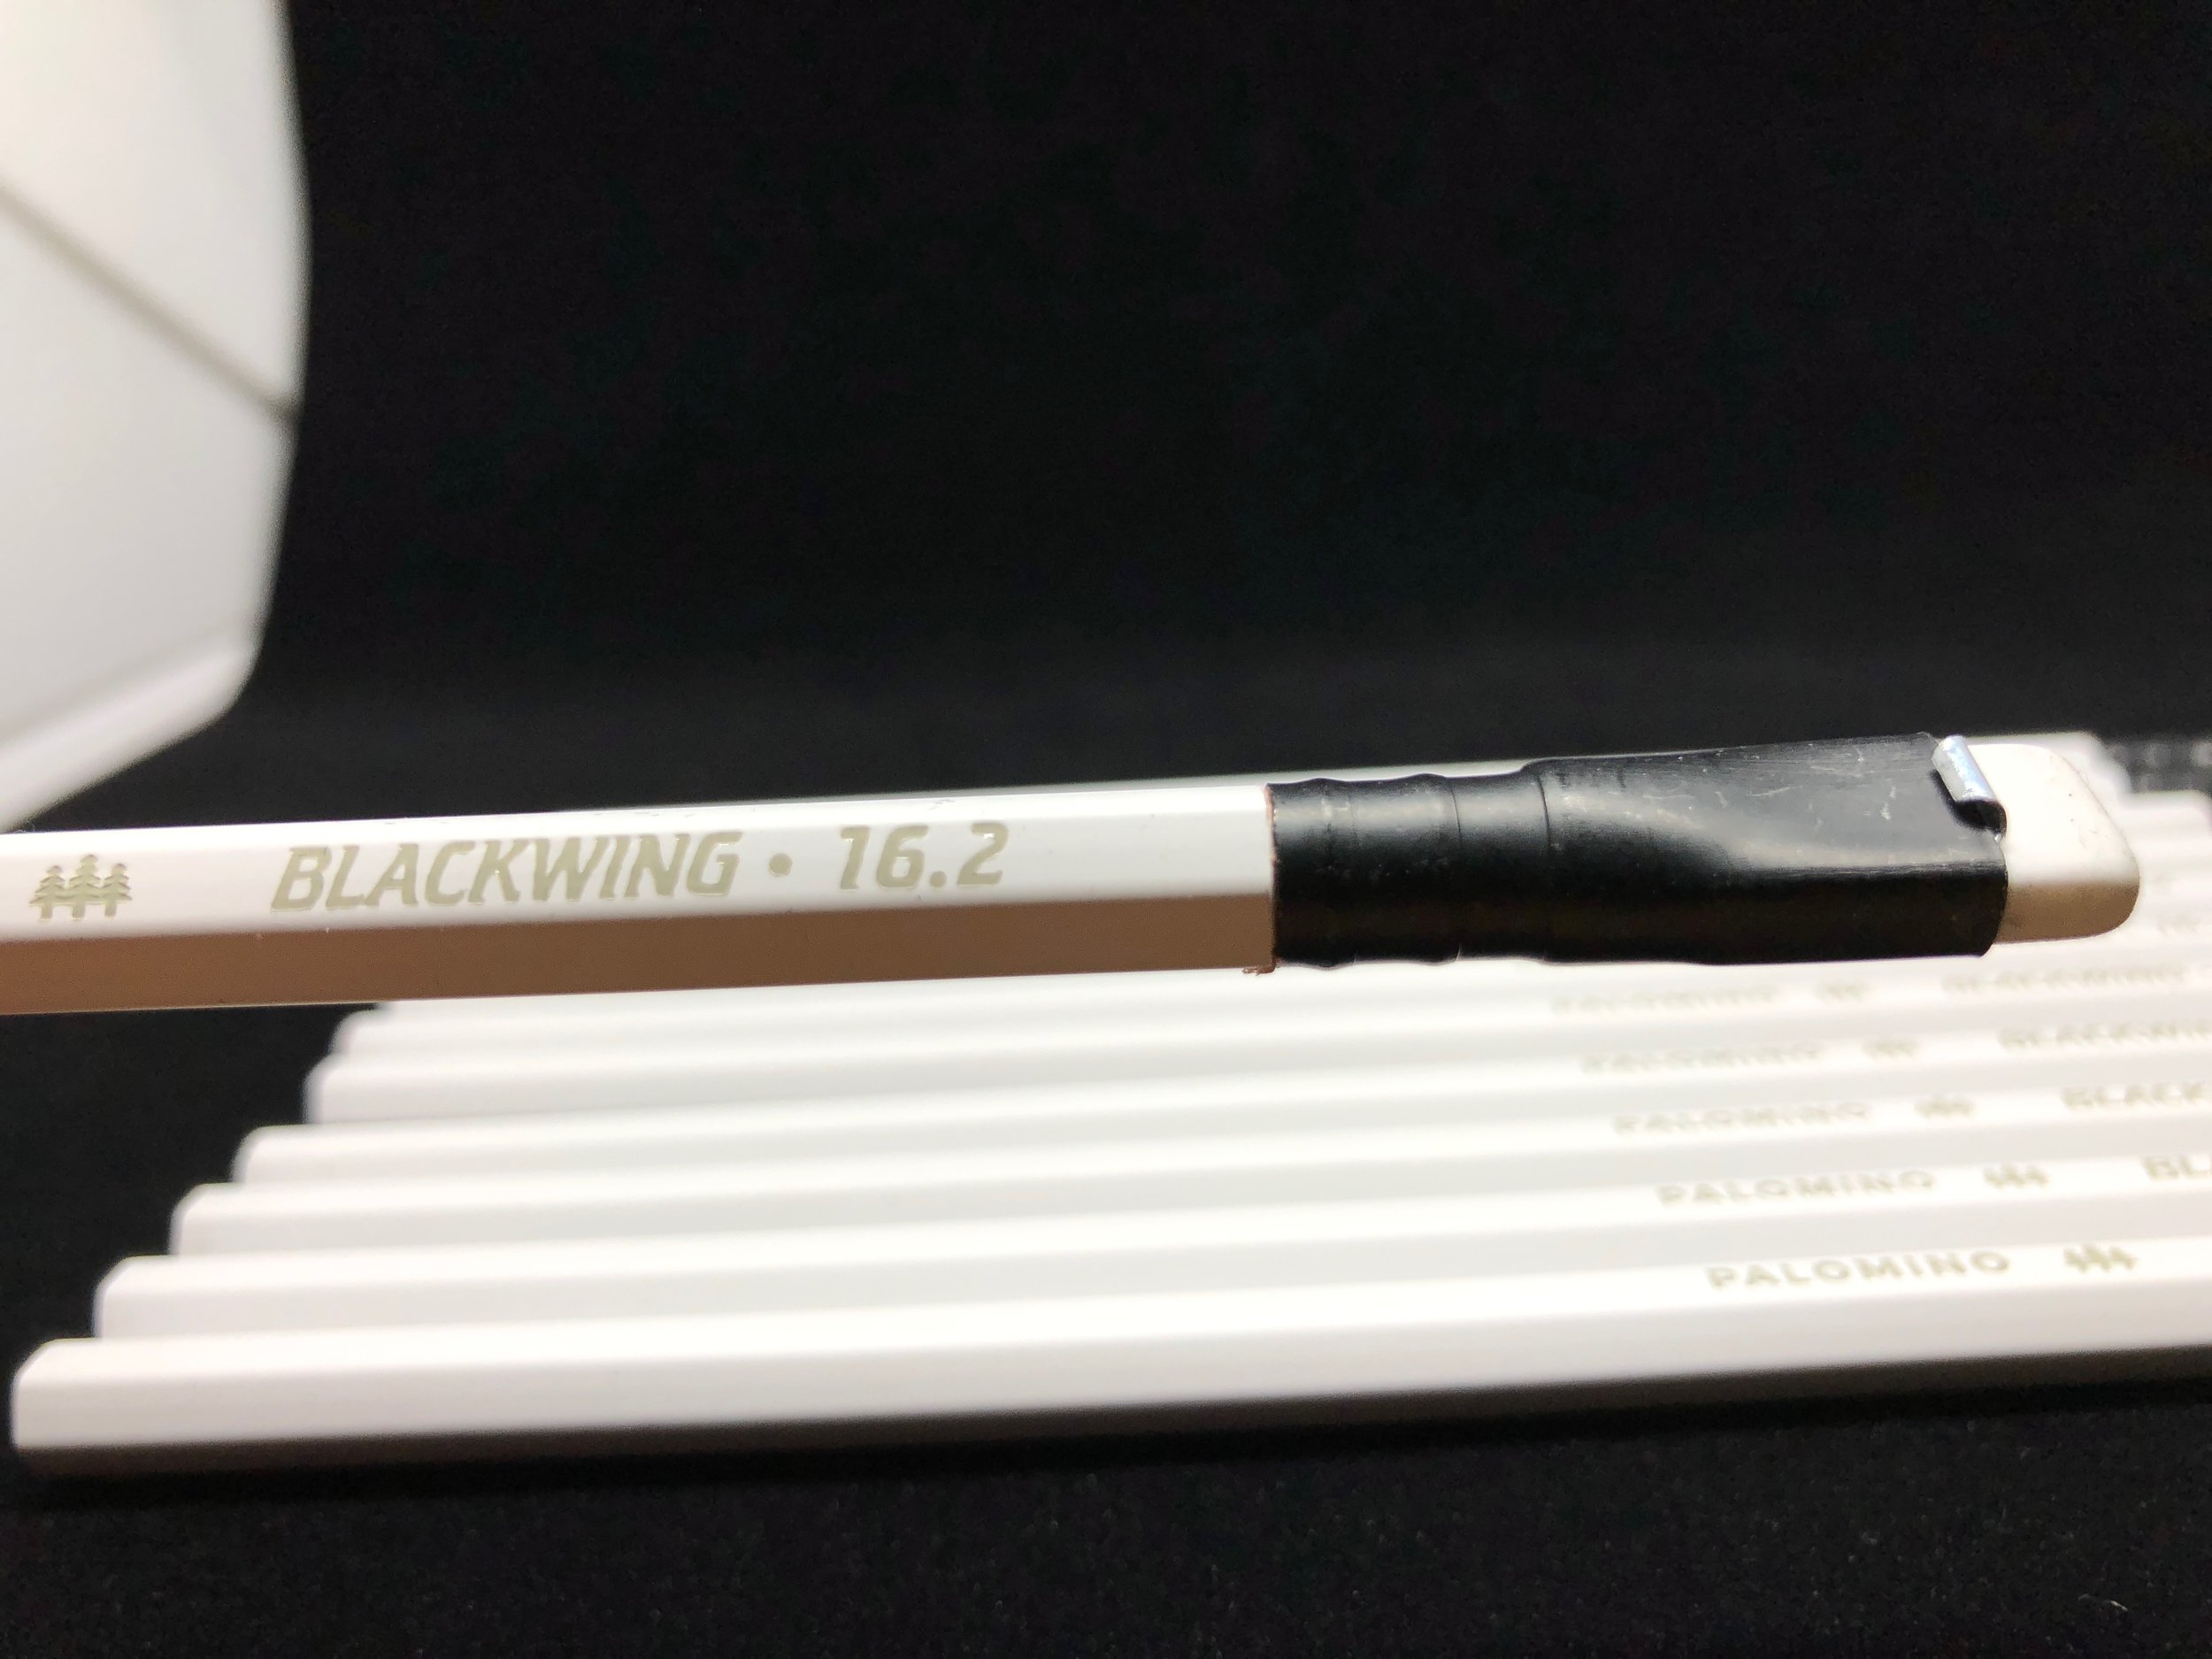 Blackwing Volumes 16.2 ONE PENCIL Ada Lovelace ONE PENCIL 